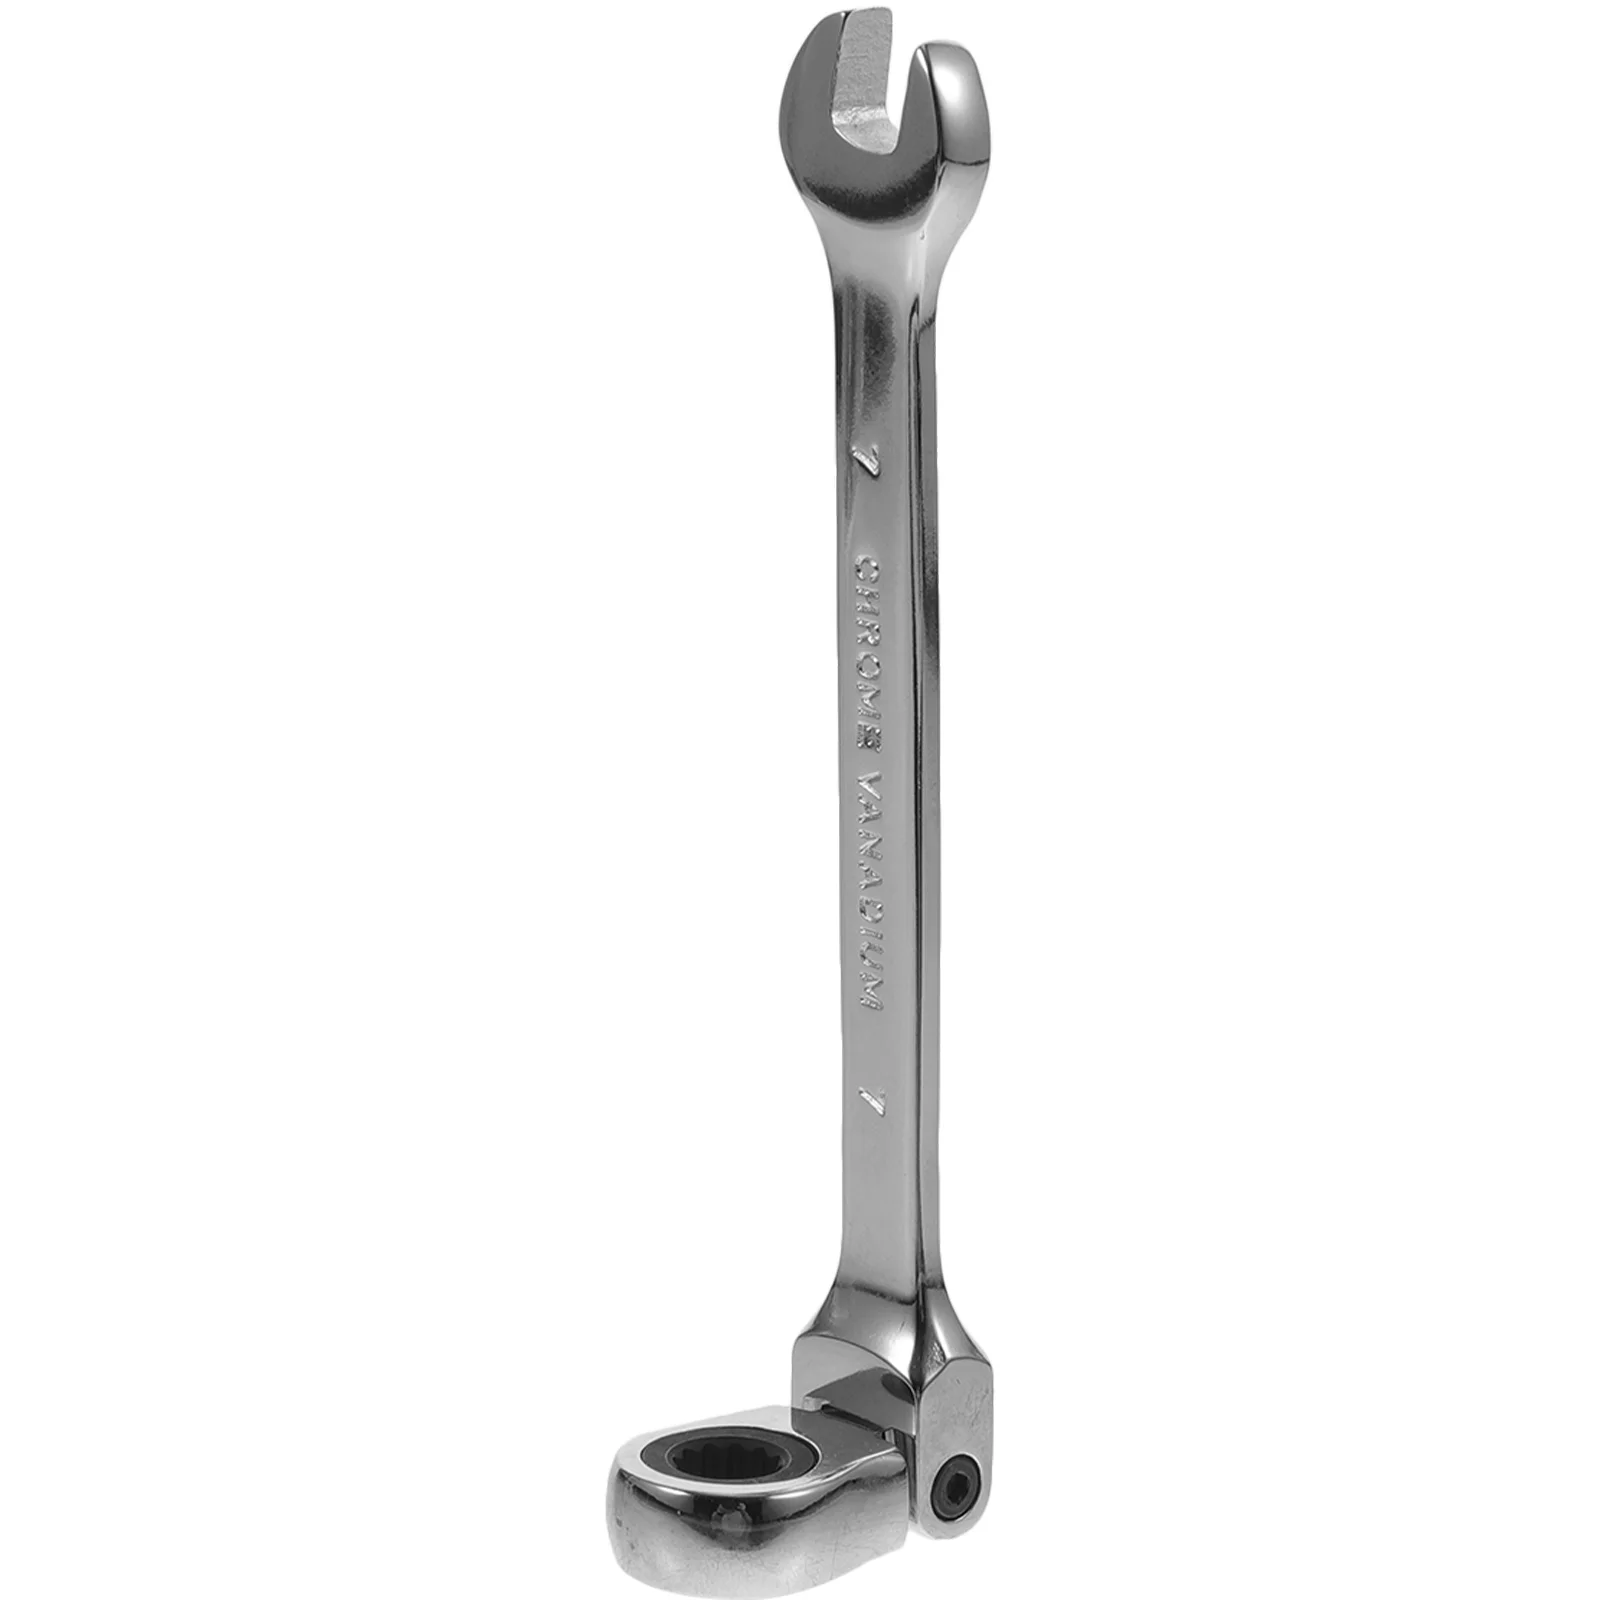 

7mm Dual Heads Ratchet 180 Degree Flexible Pivoting Head Adjustable Combination Dicephalous Wrench Spanner (Silver)